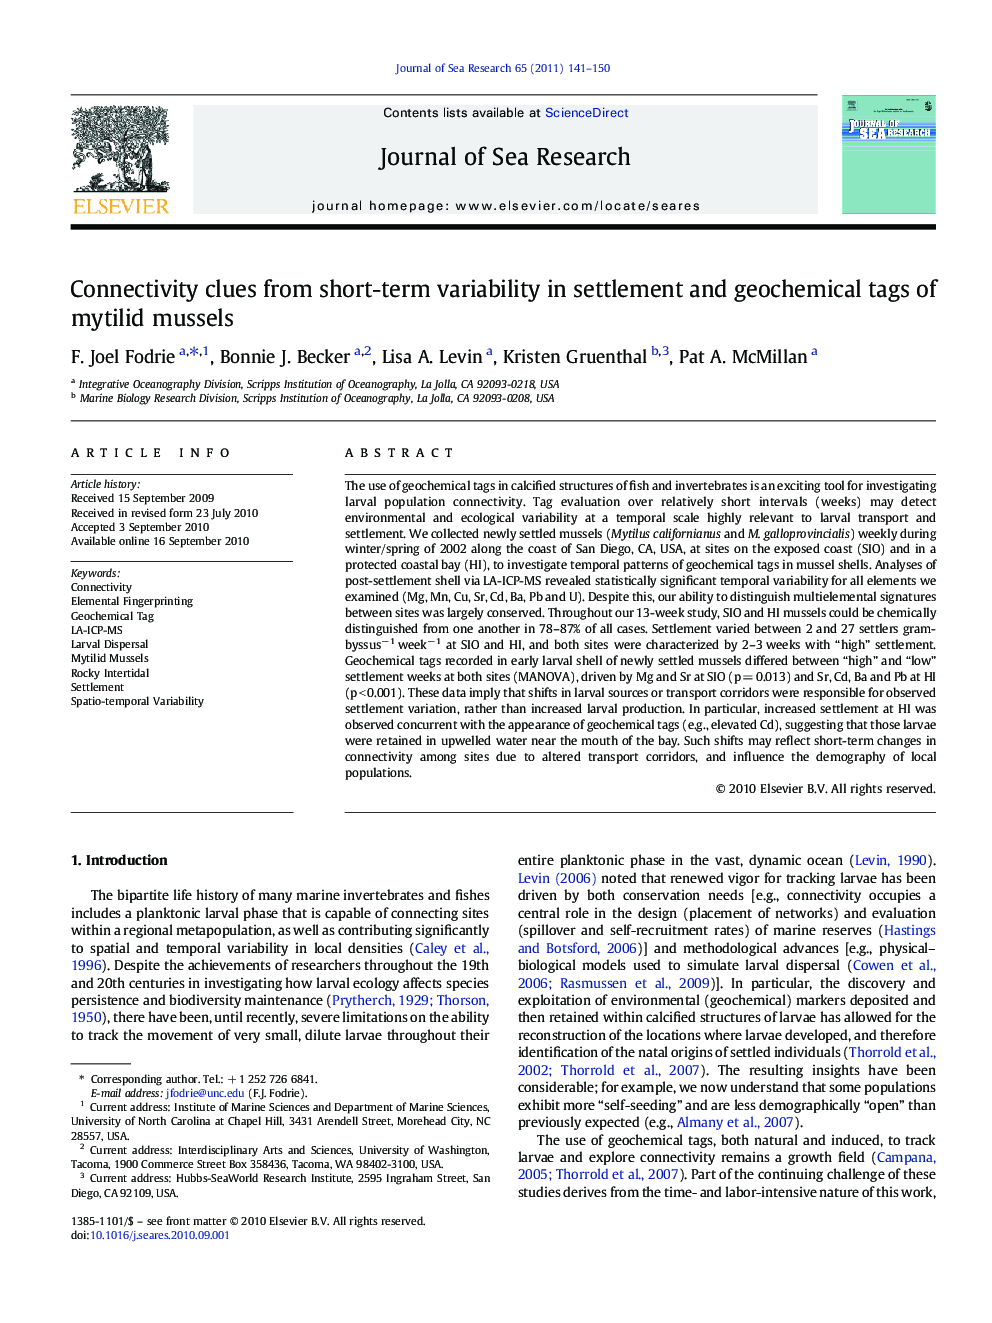 Connectivity clues from short-term variability in settlement and geochemical tags of mytilid mussels